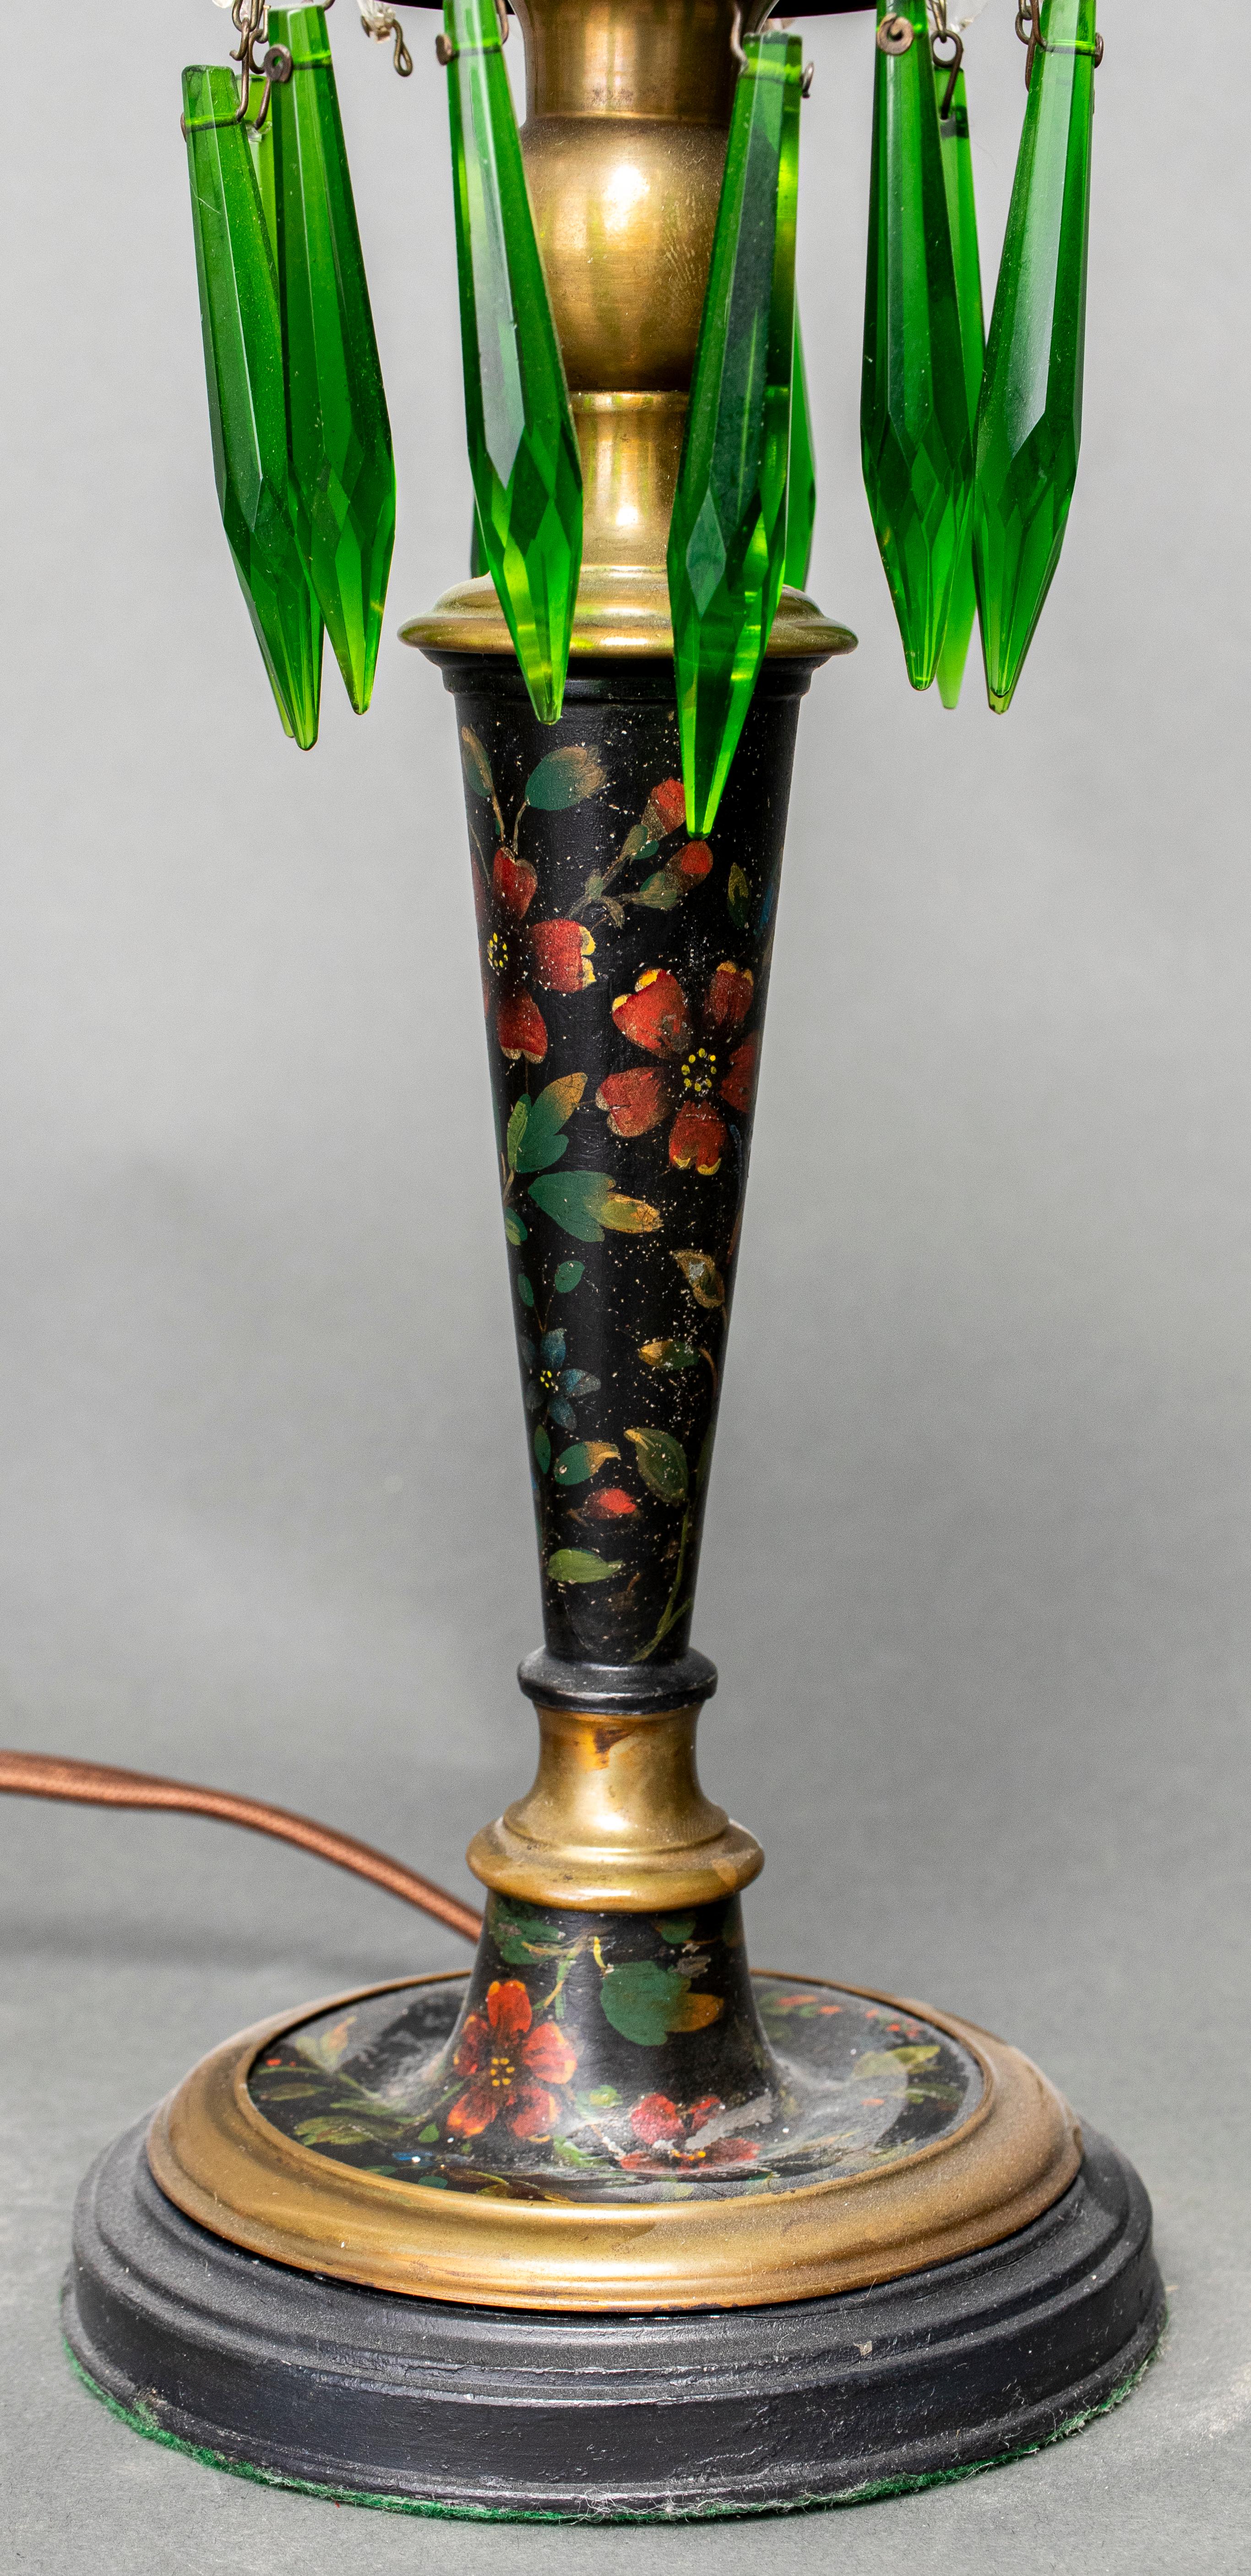 Pair of English green and clear glass luster candlesticks with floral paint decorated standards, mounted as table lamps. 14.5” height to socket x 4.5” diameter. Missing some pendants. Provenance: Removed from a 157 East 57th Street estate.